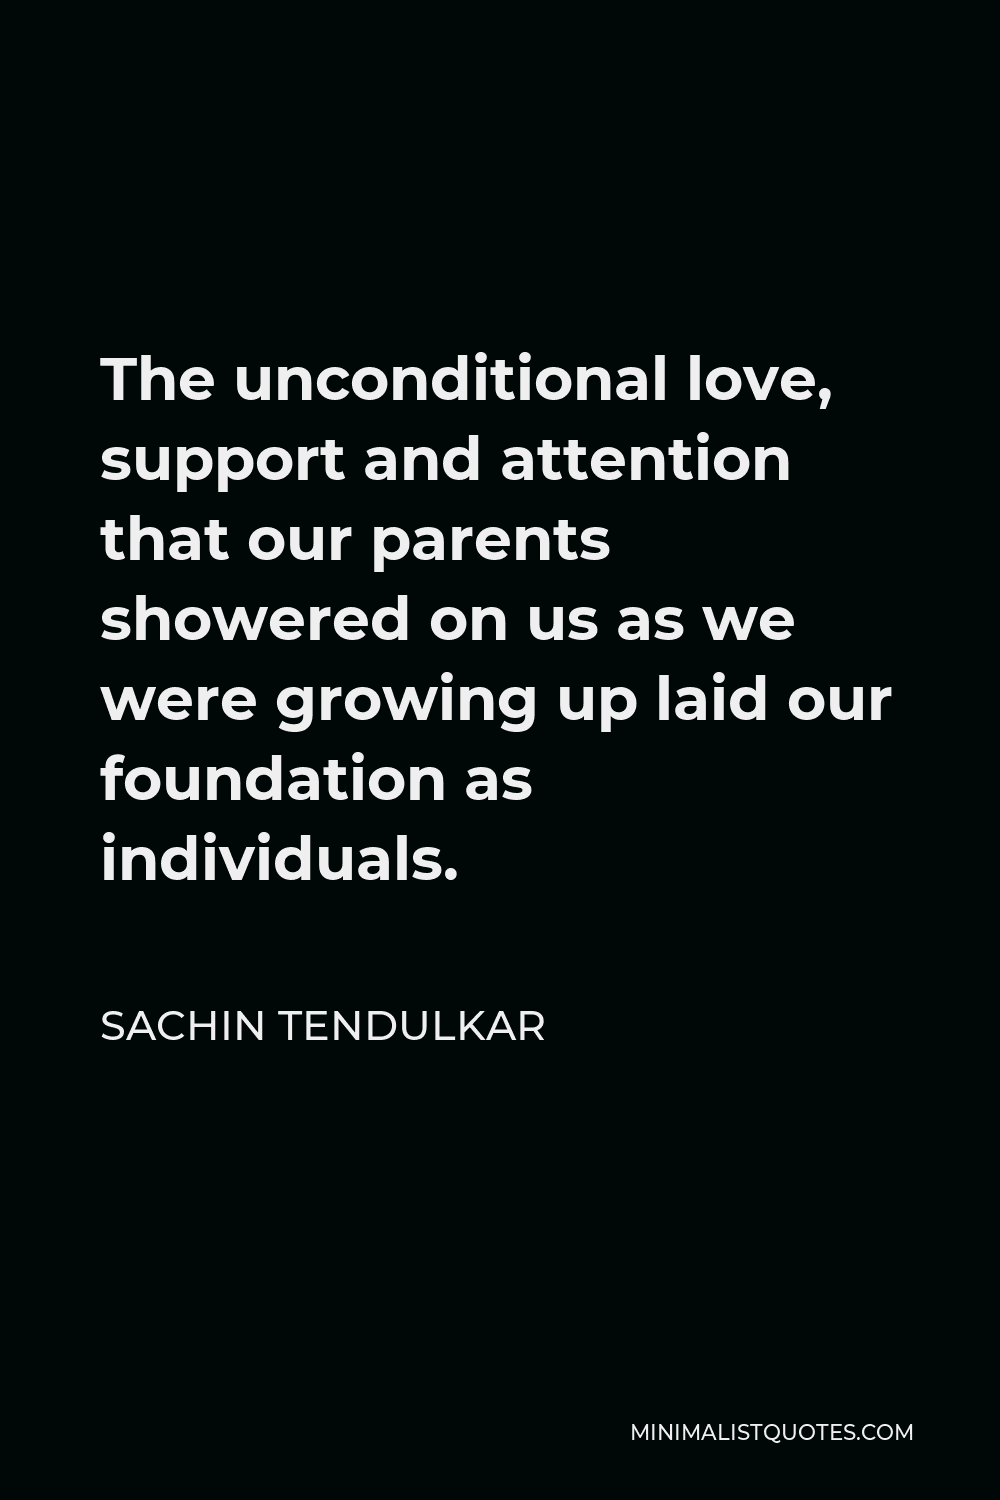 Sachin Tendulkar Quote: The unconditional love, support and ...